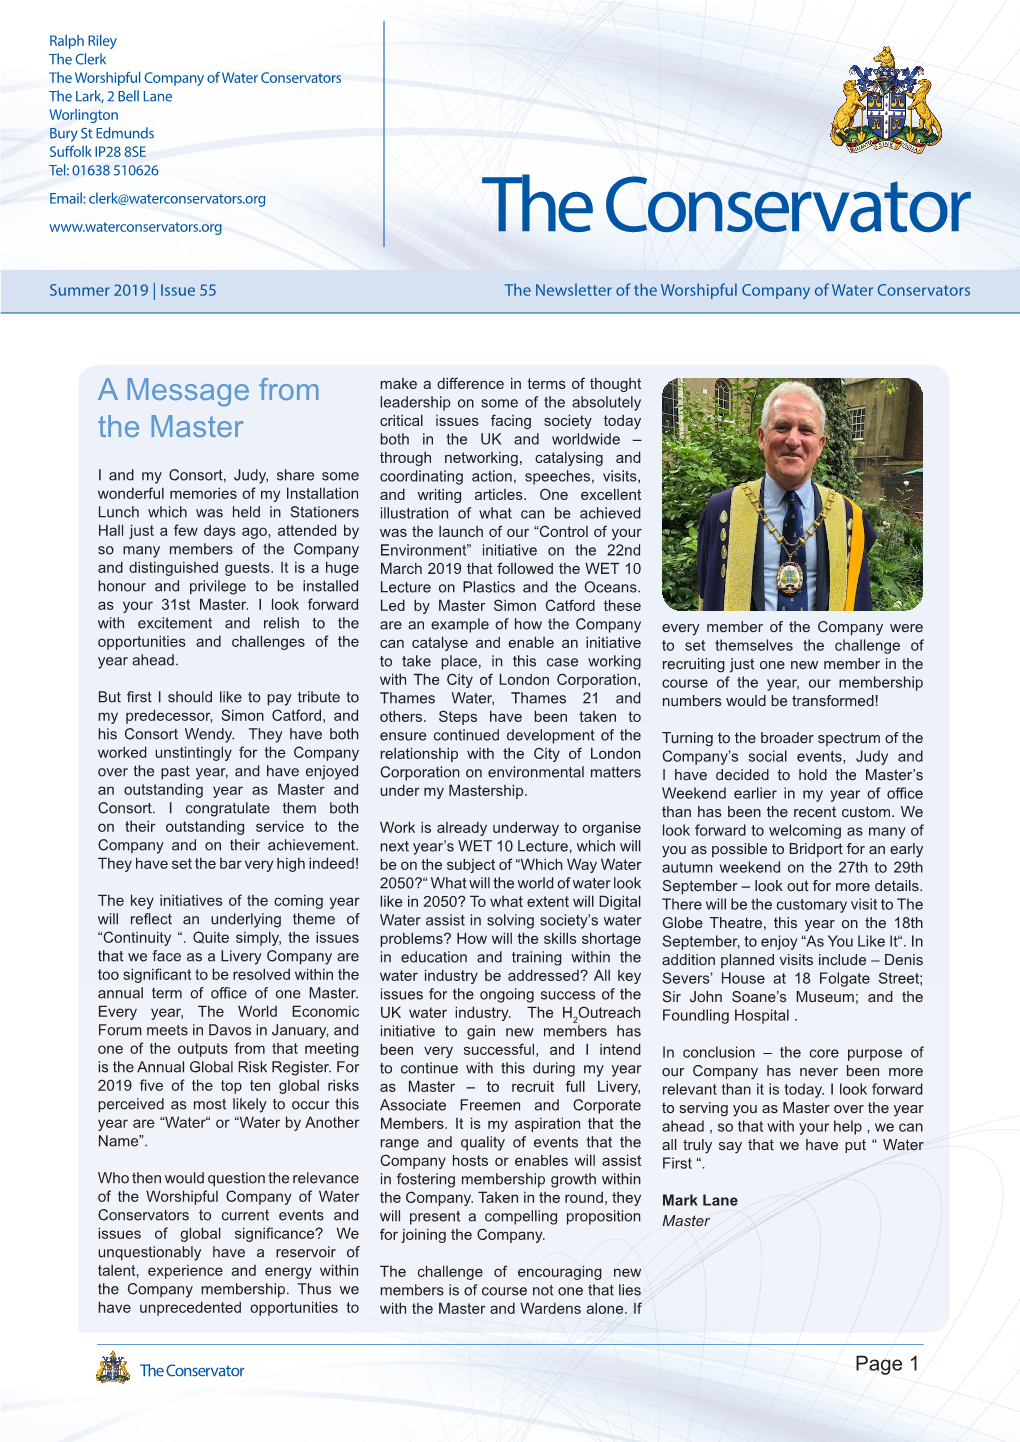 Summer 2019 | Issue 55 the Newsletter of the Worshipful Company of Water Conservators